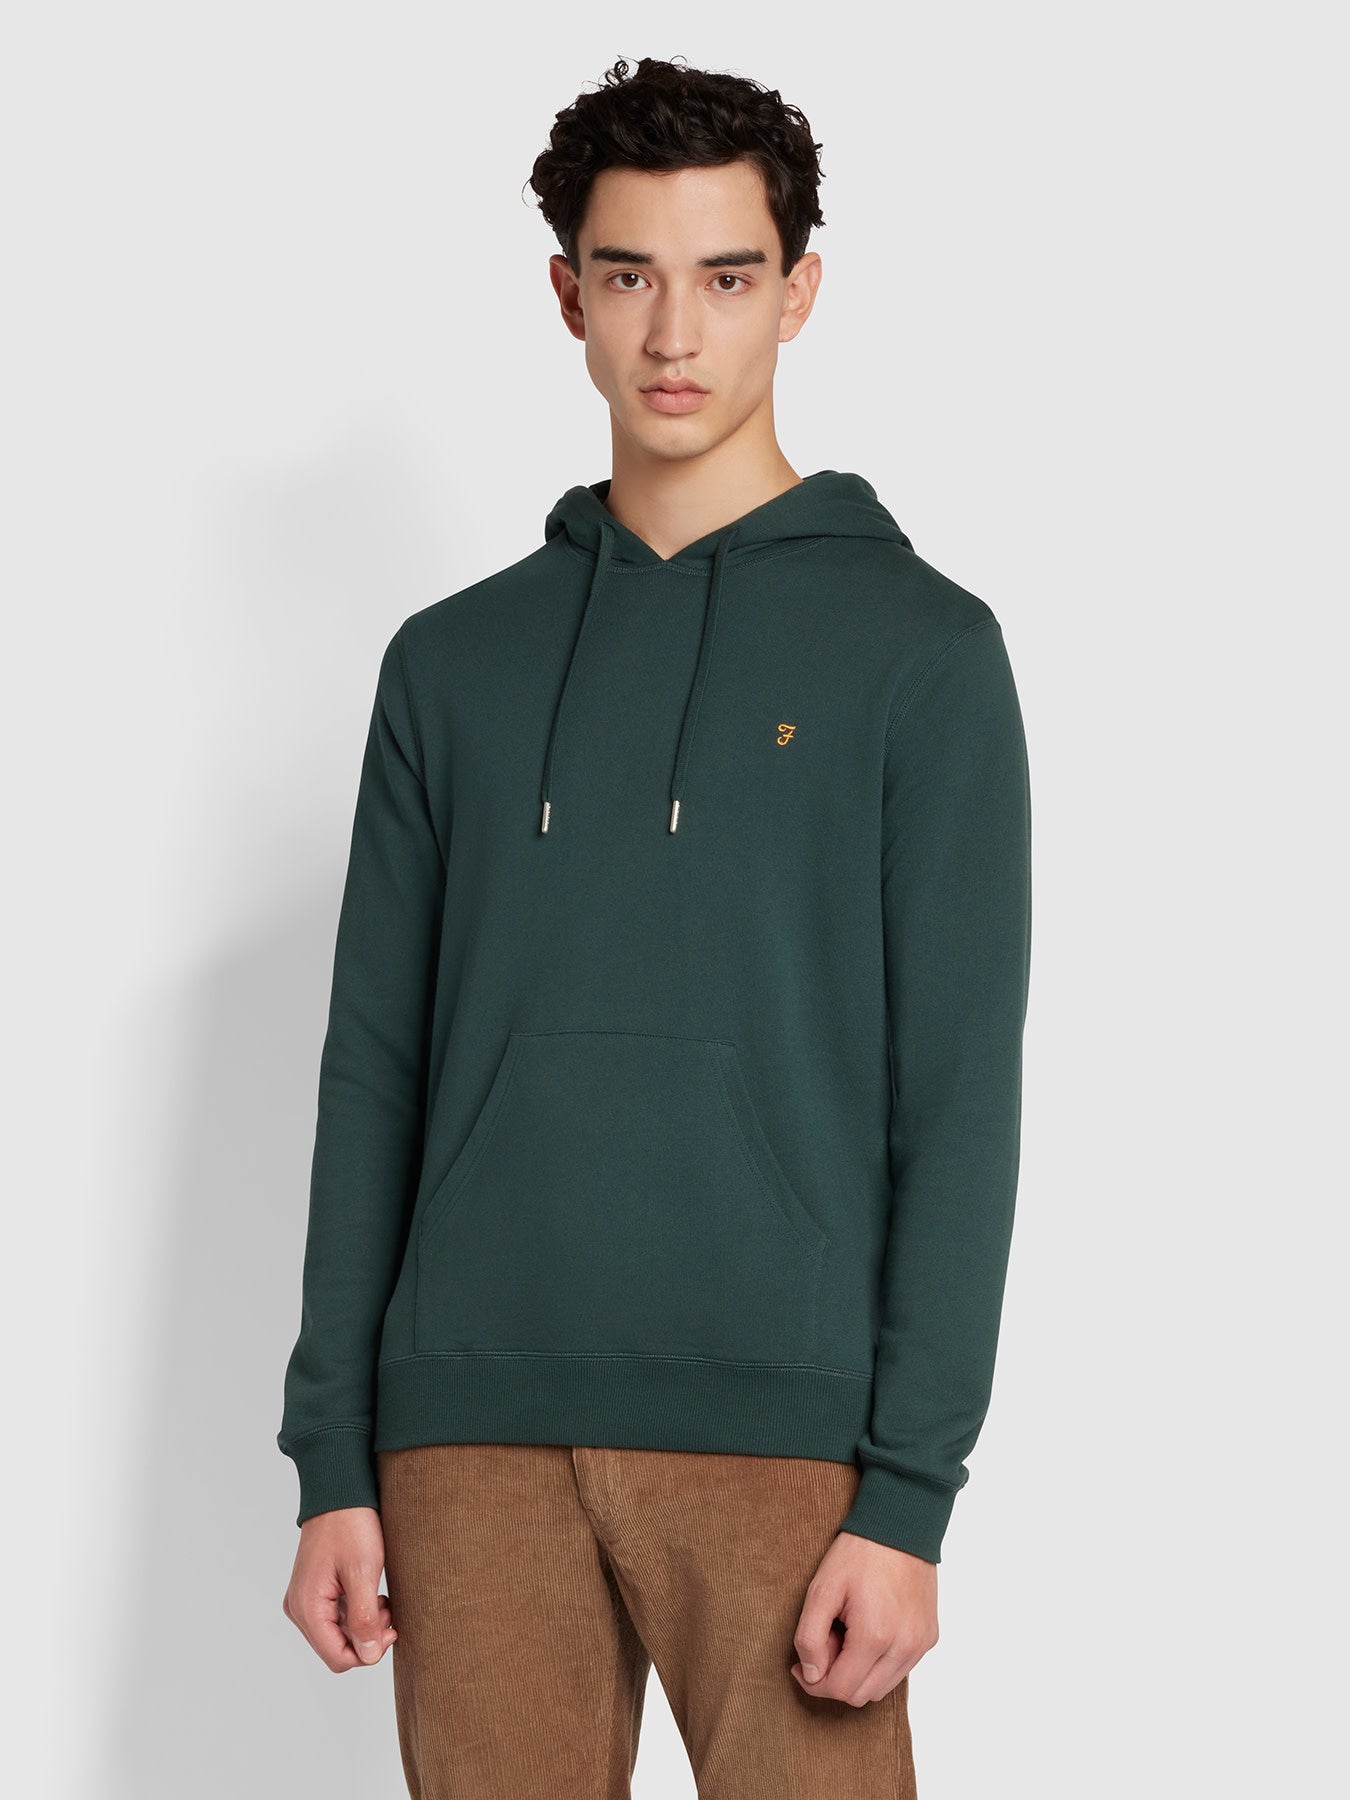 View Zain Slim Fit Organic Cotton Hoodie In Farah Forest Green information